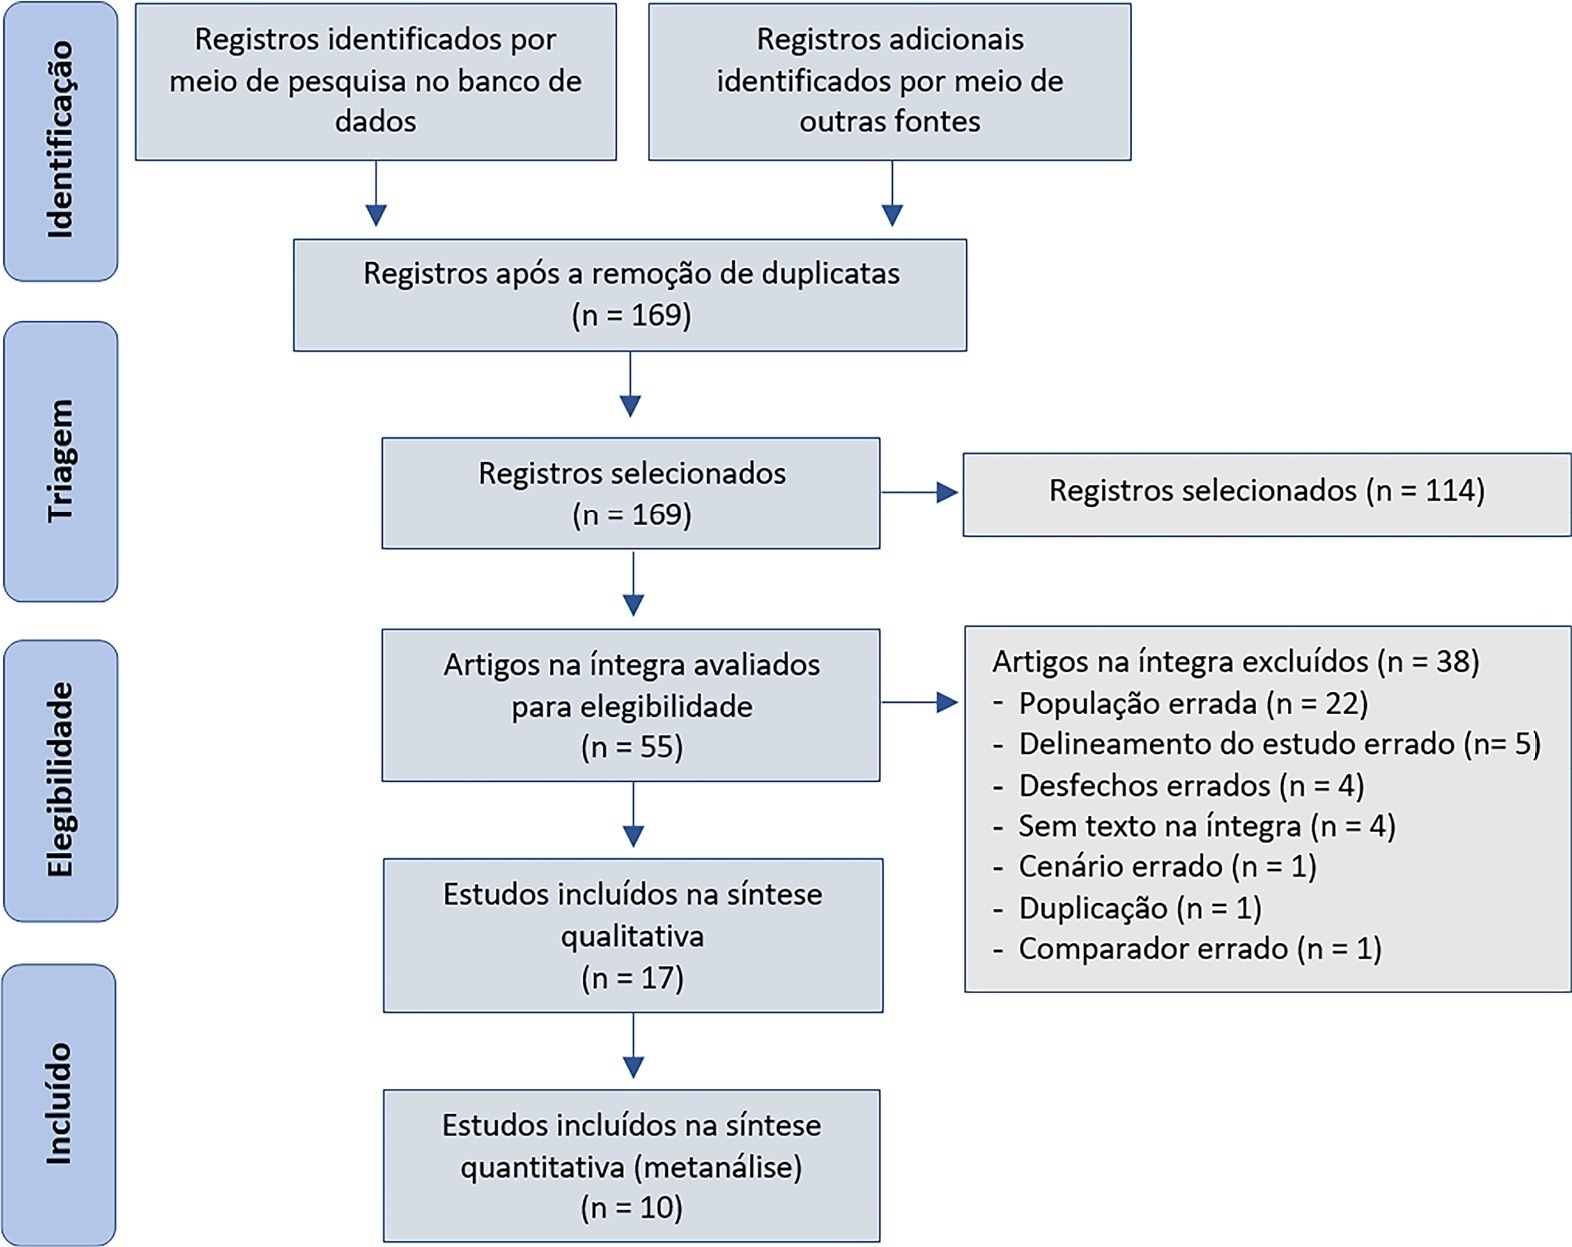 Comparison of central venous minus arterial carbon dioxide pressure to arterial minus central venous oxygen content ratio and lactate levels as predictors of mortality in critically ill patients: a systematic review and meta-analysis